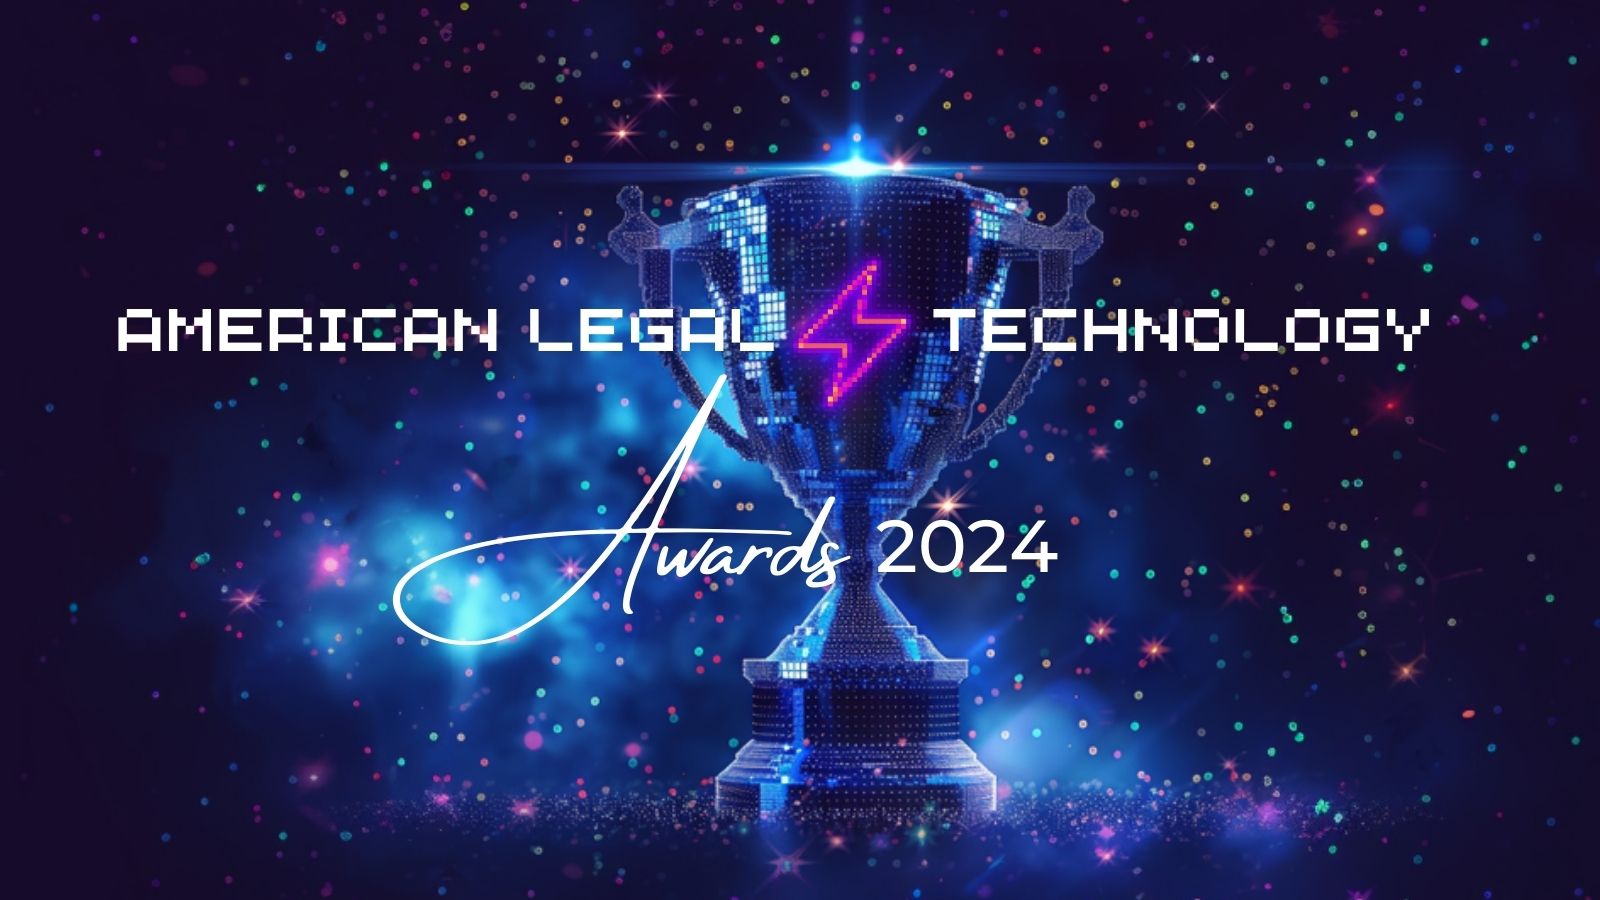 Shining a Light on Legal Technology Innovation: The American Legal Technology Awards Celebrate 2024 with New Categories and Exciting Events